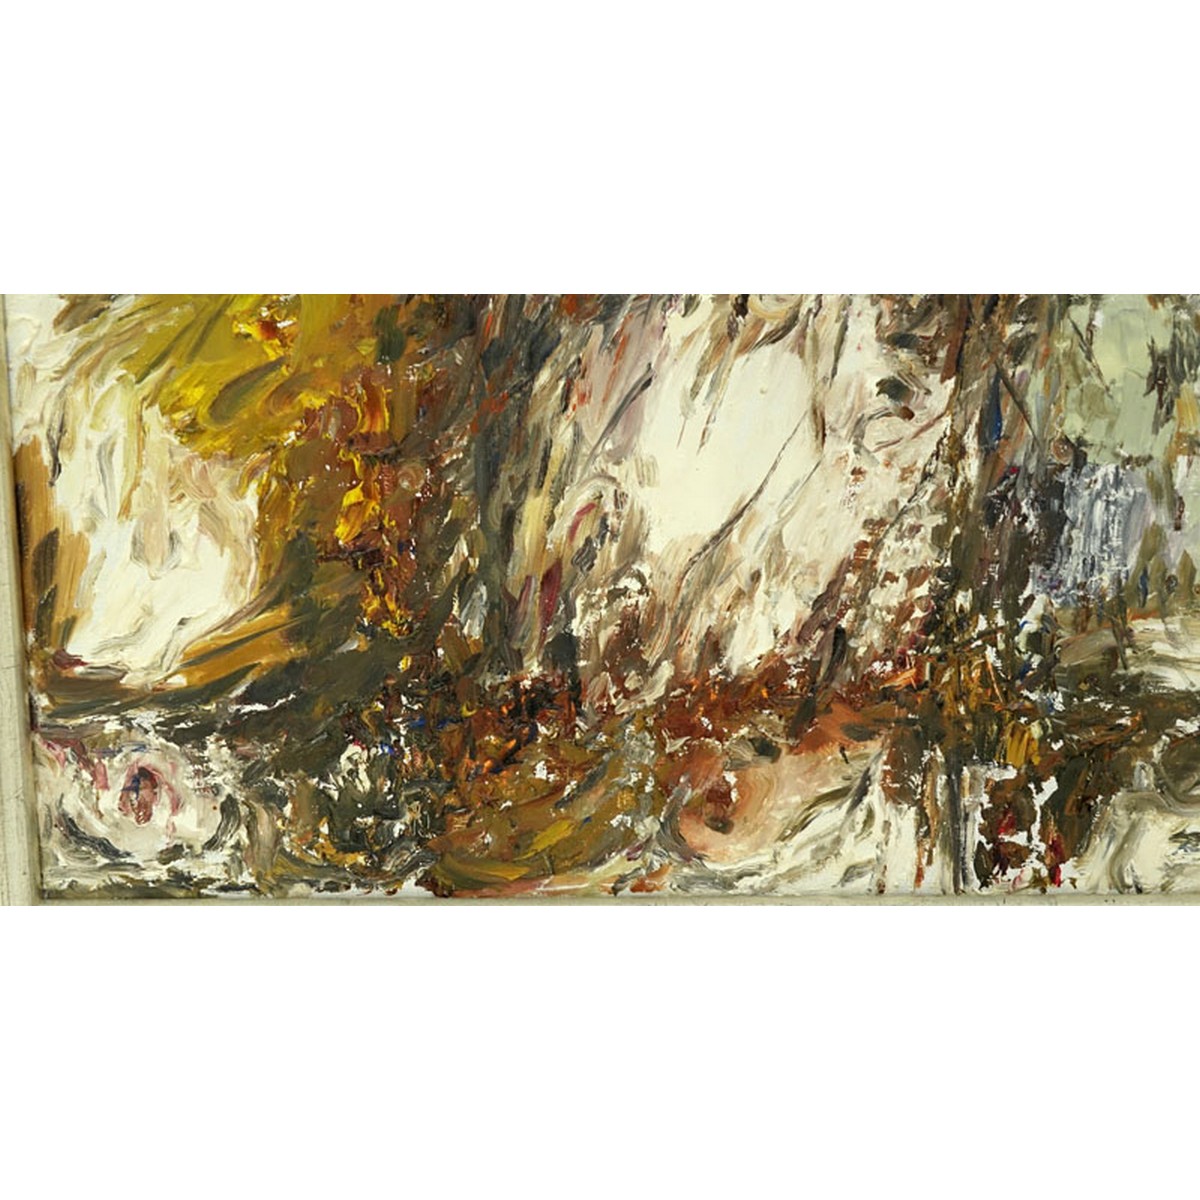 F. Brutsch (20th C.) Oil on Canvas, Abstract Composition, Signed and Dated 1965 Lower Right.